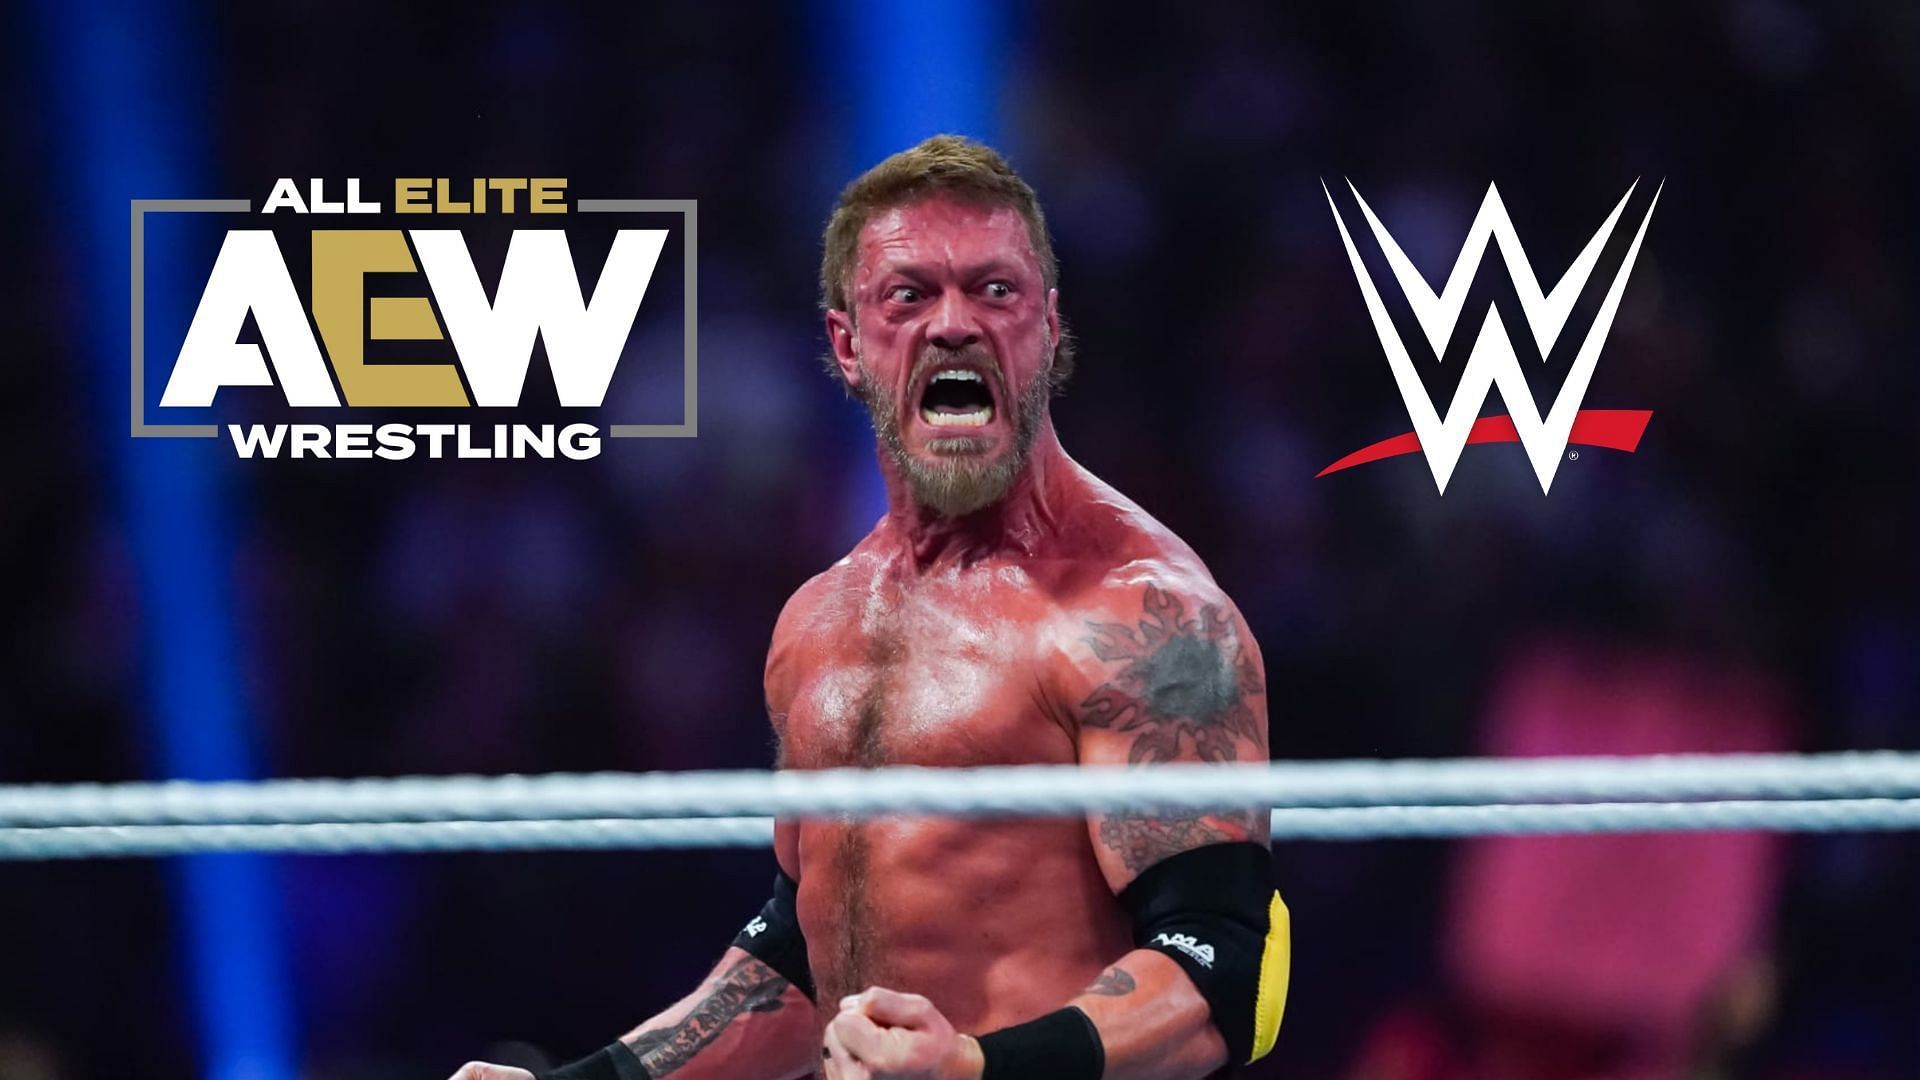 Should Edge have joined AEW after coming out of retirement?